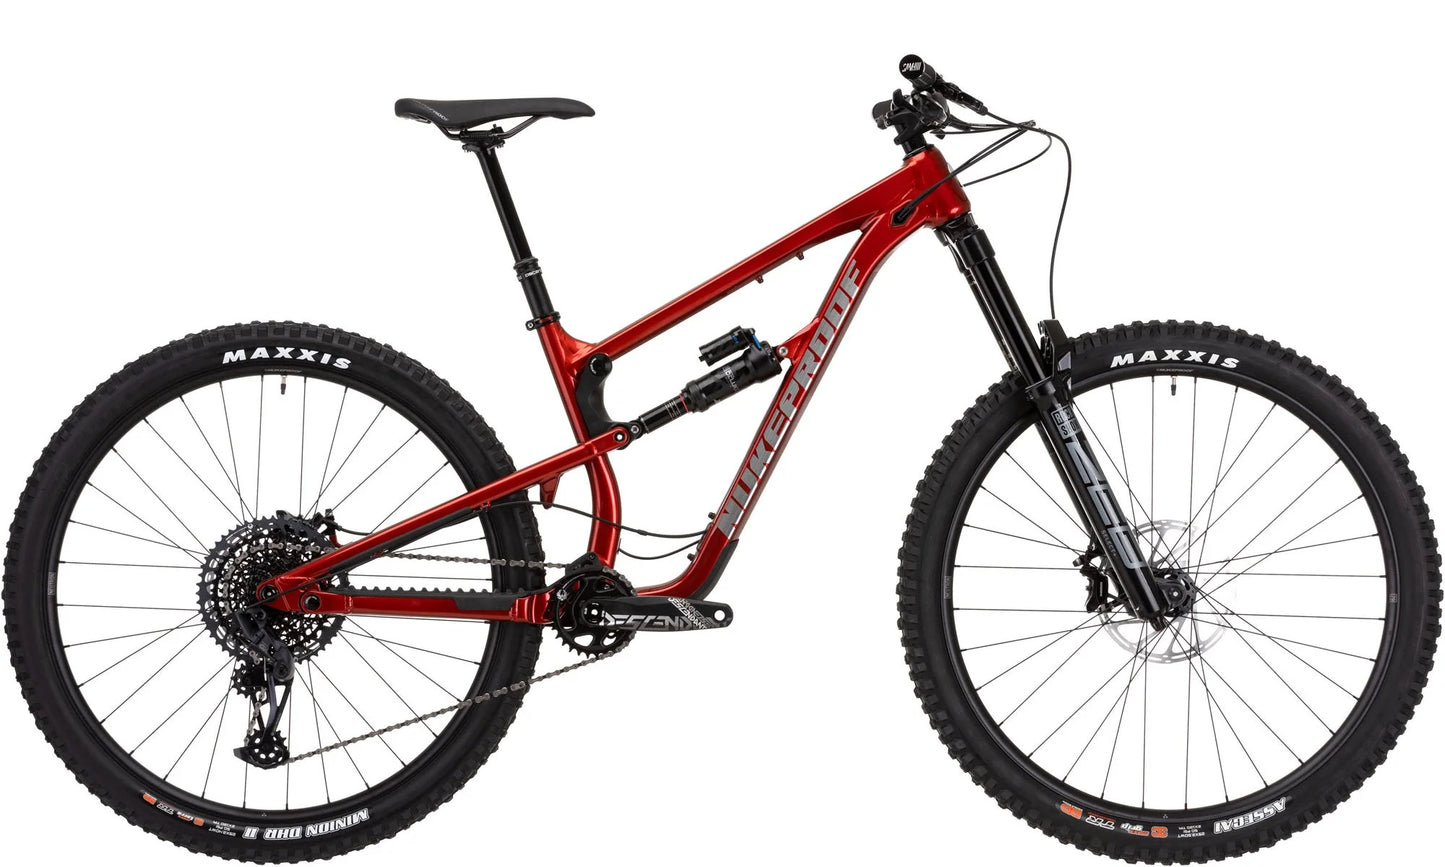 NUKEPROOF MEGA 290 ALLOY PRO - ROSSO RED